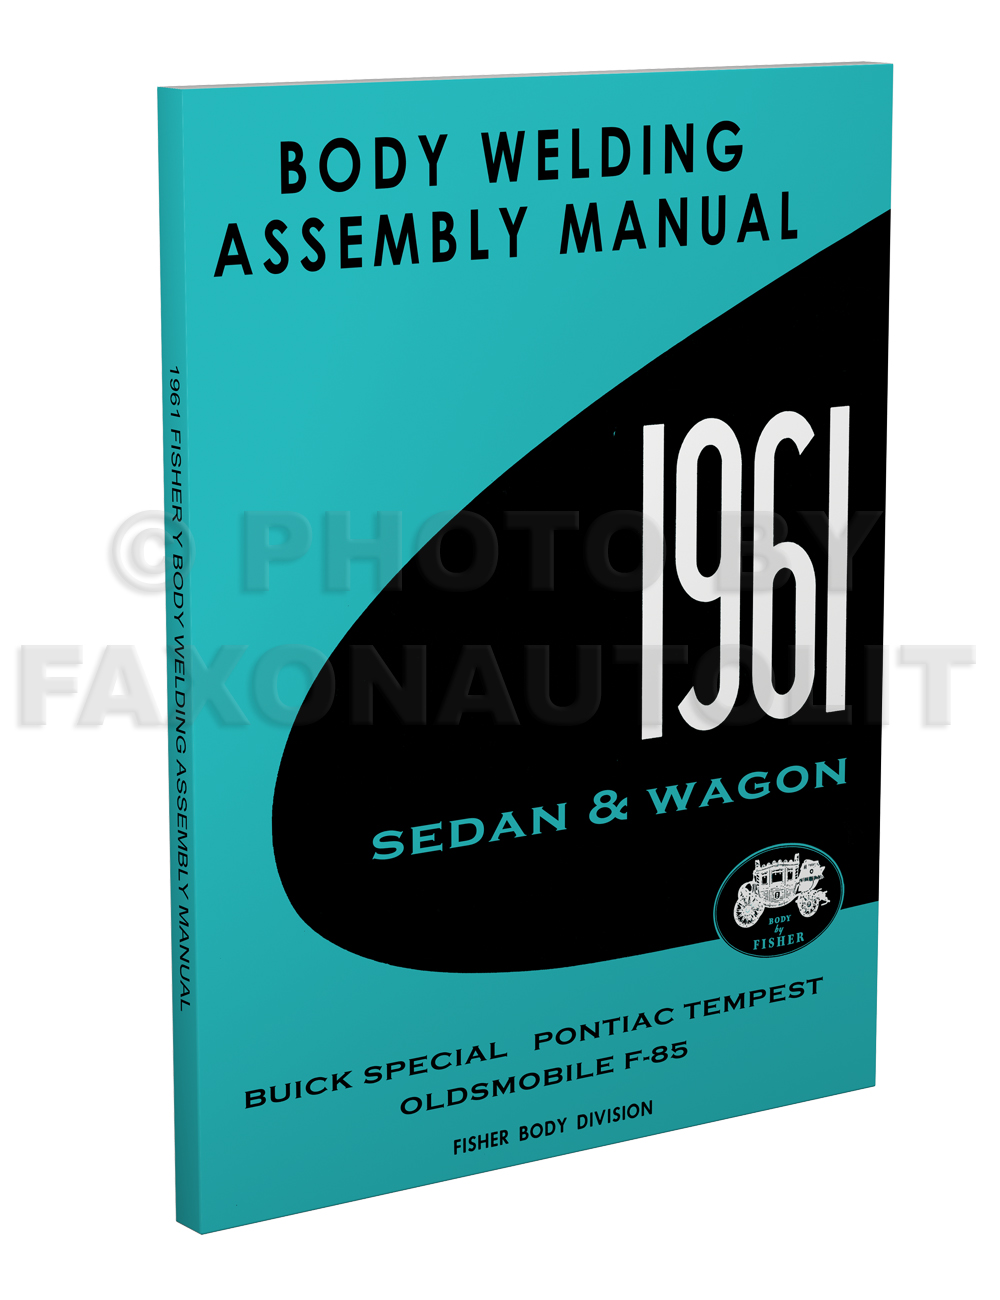 1961 Fisher Body Welding Assembly Manual - Pontiac Tempest  Buick Special Oldsmobile F-85